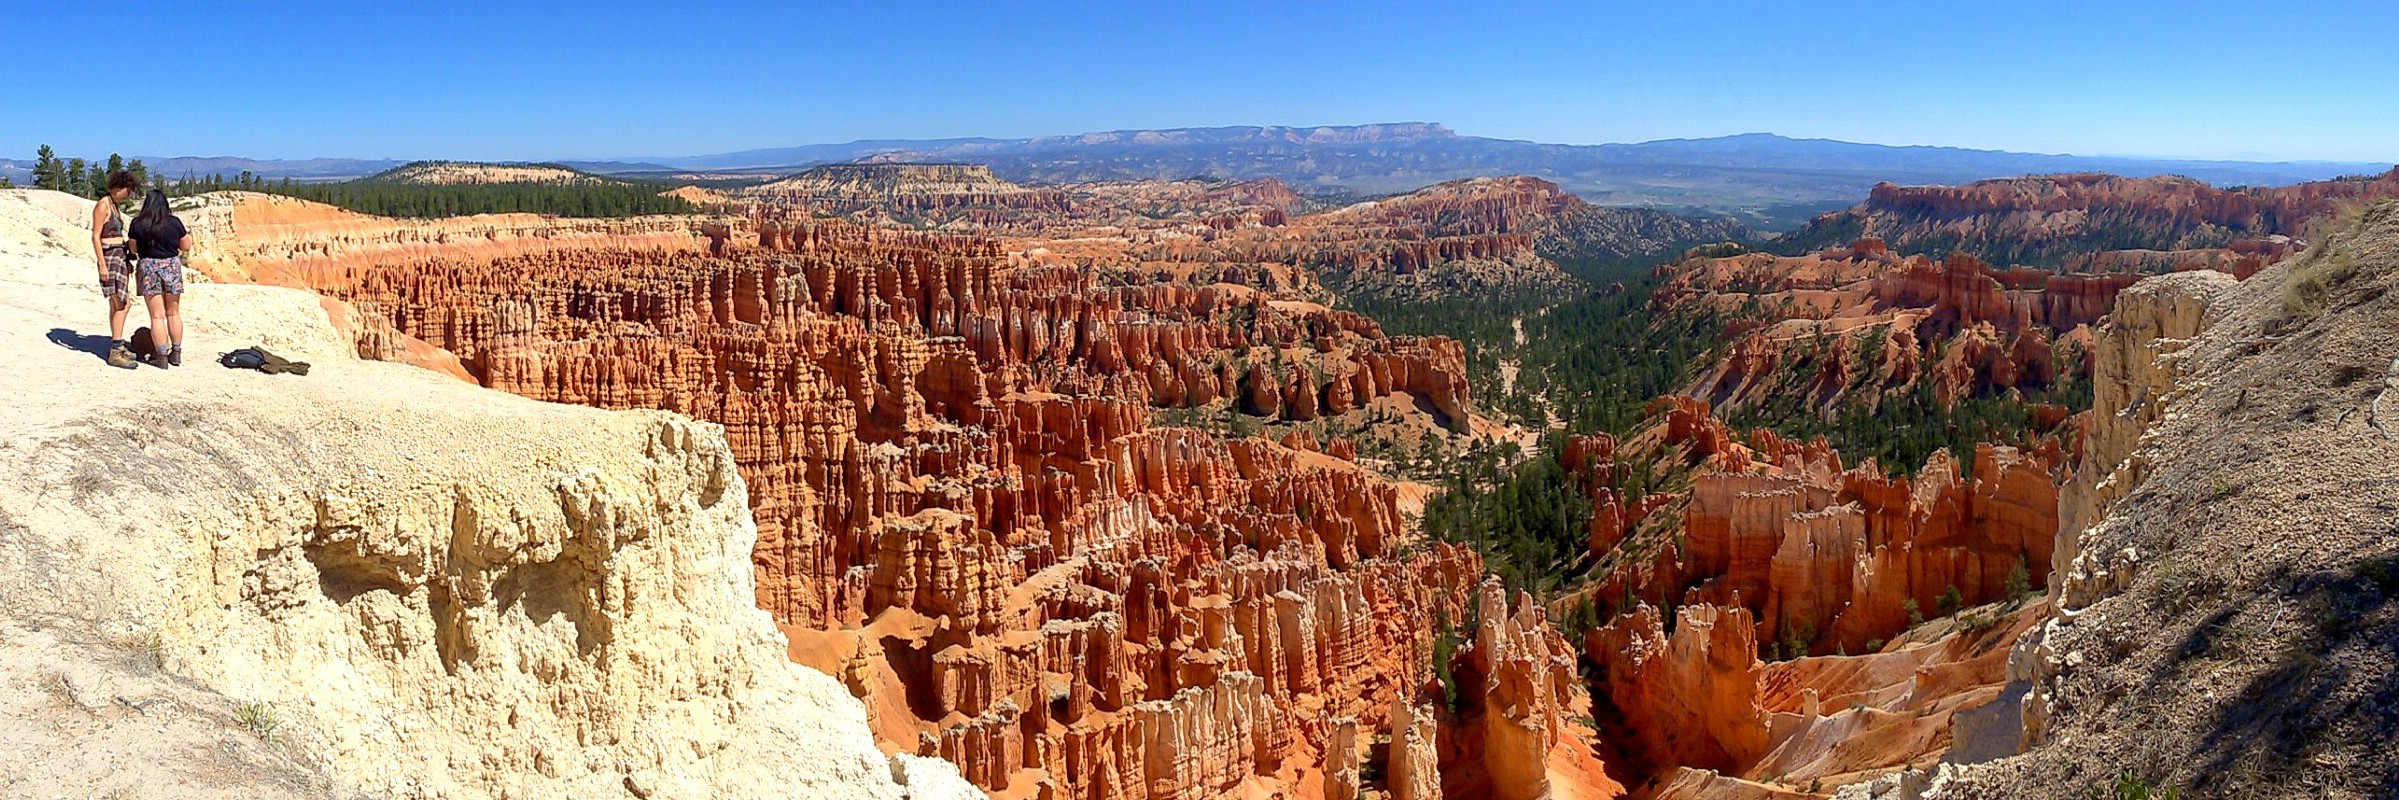 Overlooking the Bryce Amphitheater in Bryce Canyon National Park, southern Utah, USA. September 8, 2016.